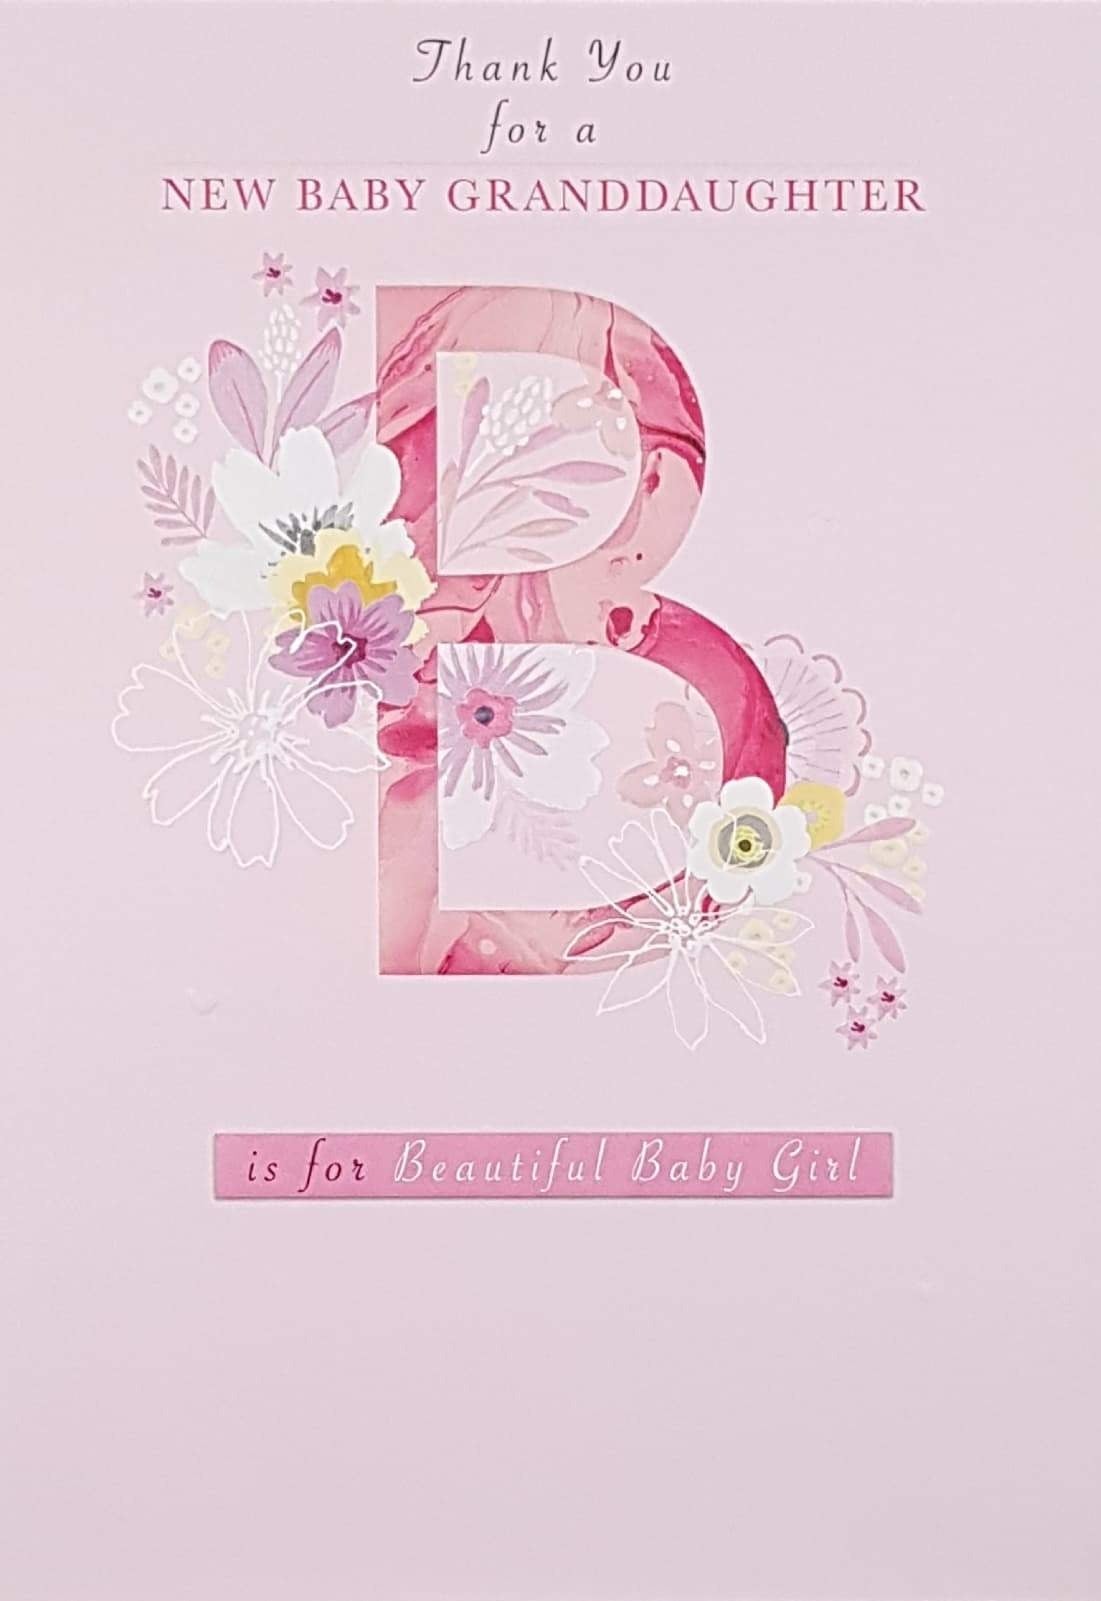 New Baby Card - Girl (Granddaughter) / Big Pink 'B' Decorated By Flowers